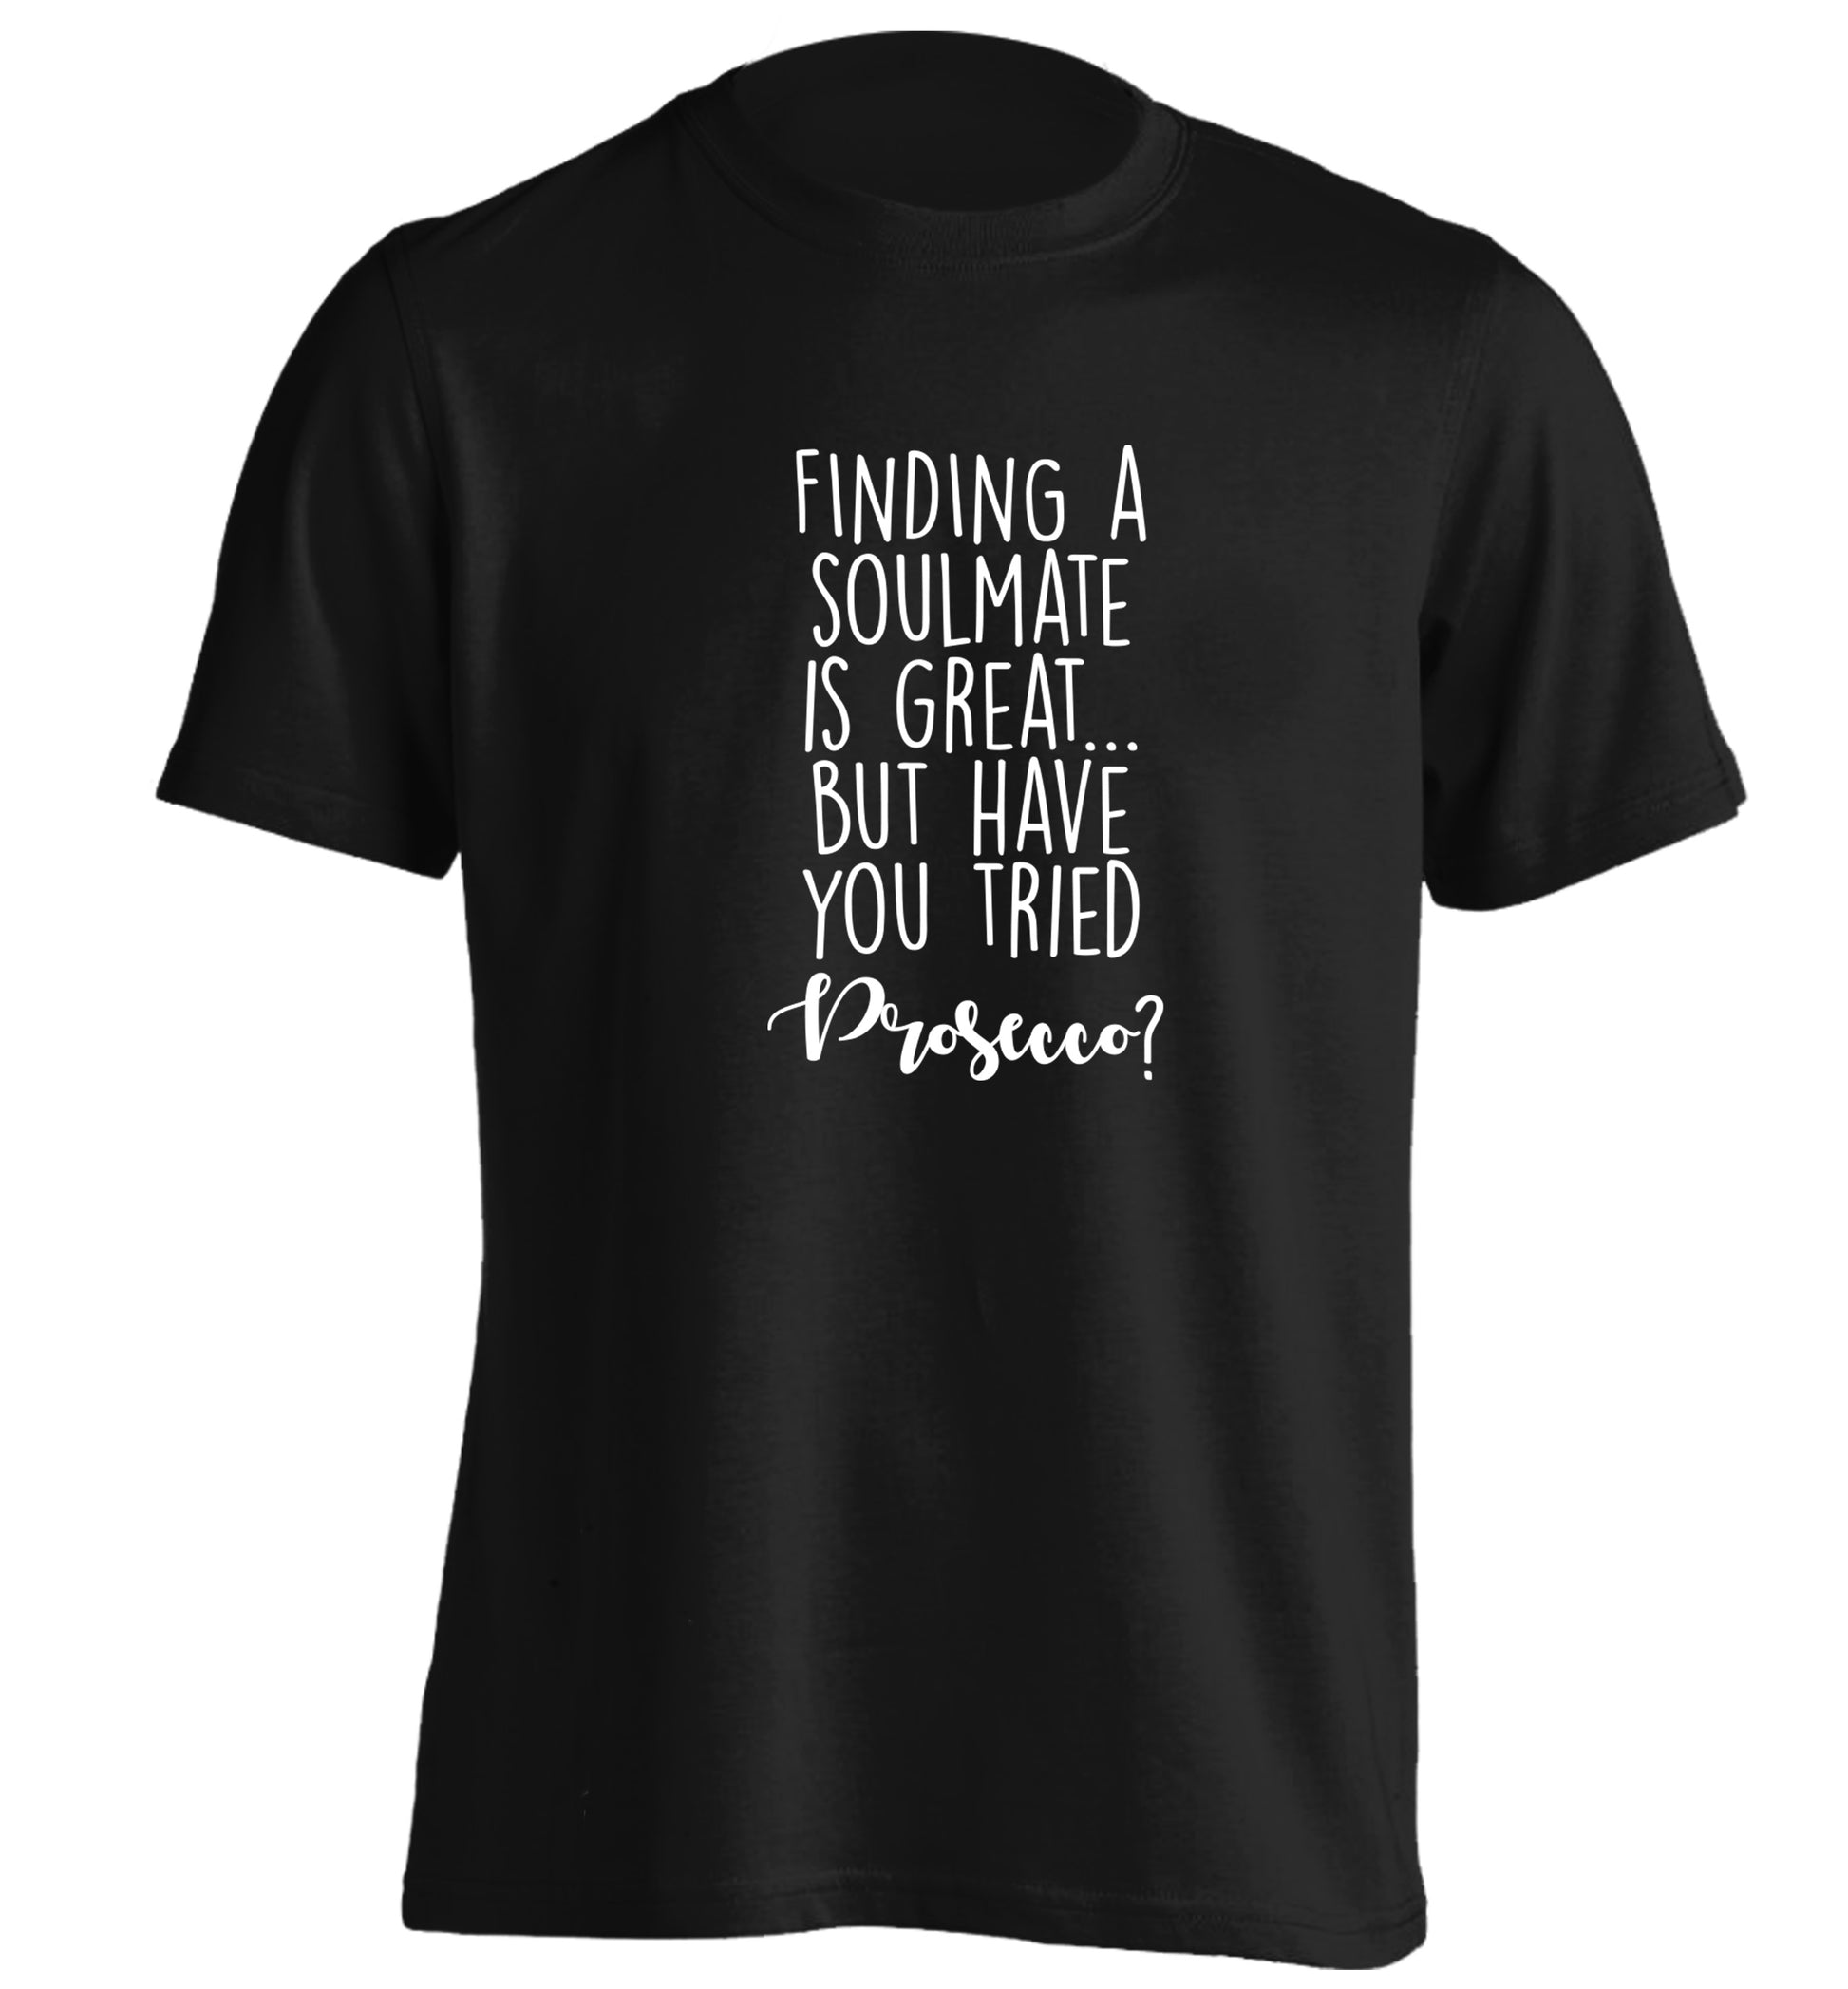 Finding a soulmate is great but have you tried prosecco? adults unisex black Tshirt 2XL